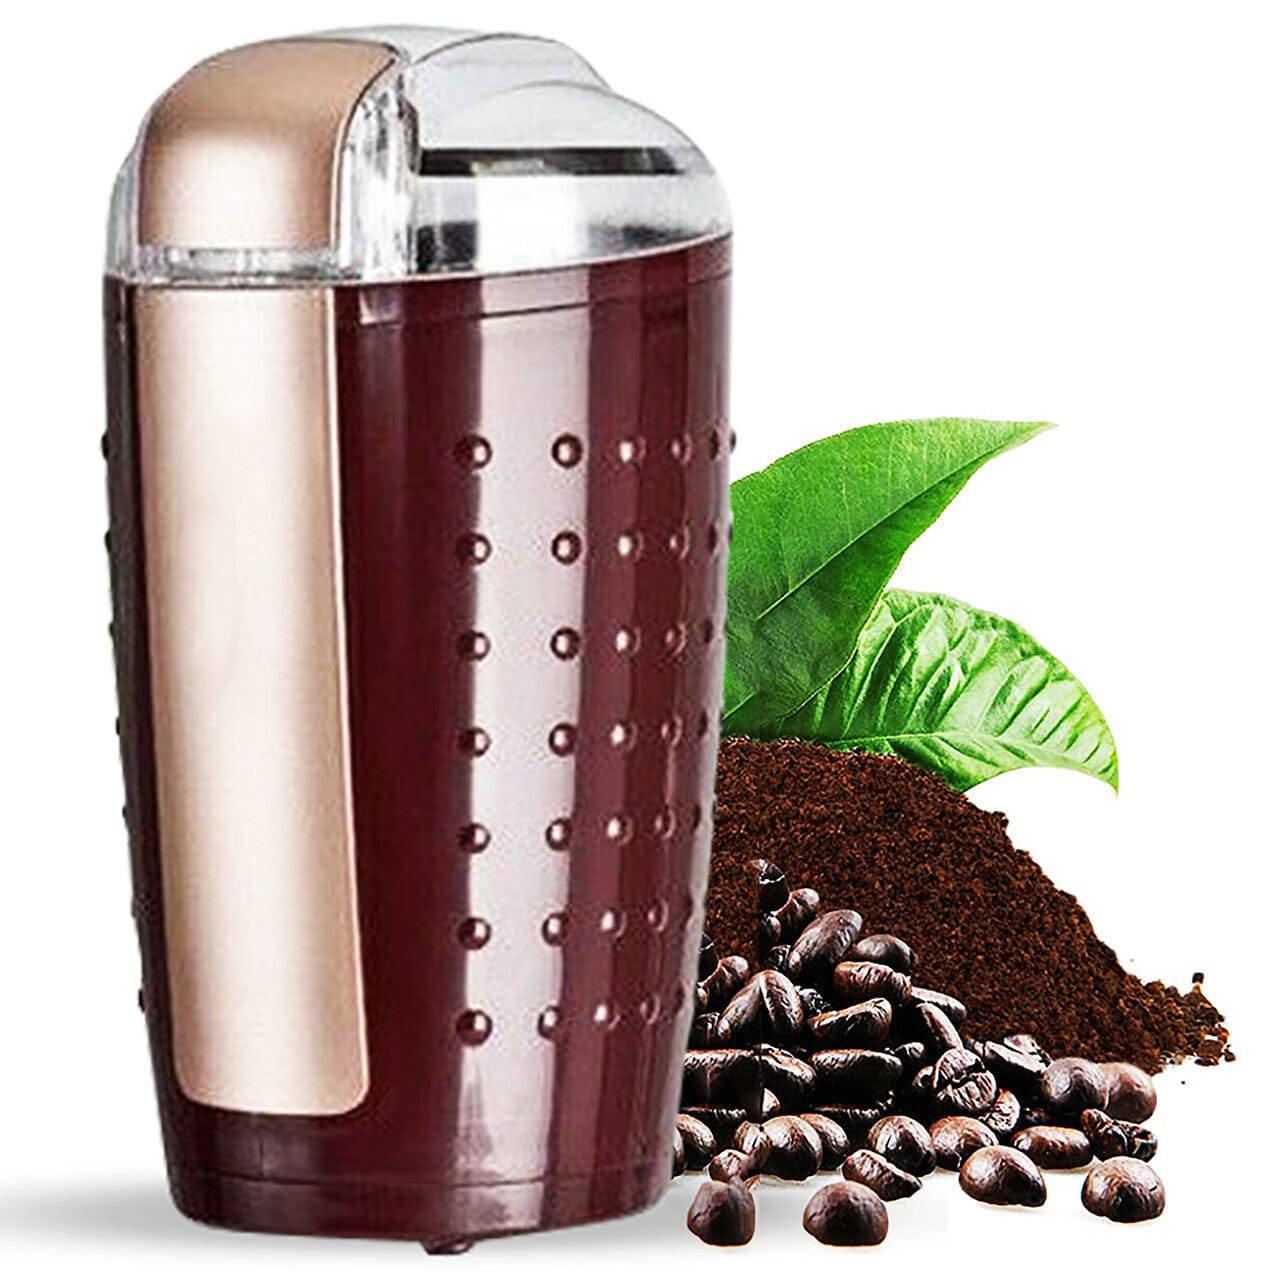 5 Core Electric Coffee Grinder -Stainless Steel -4.5oz Capacity with Easy On/Off  5 Core CG 01 Black & Brown - 5 Core